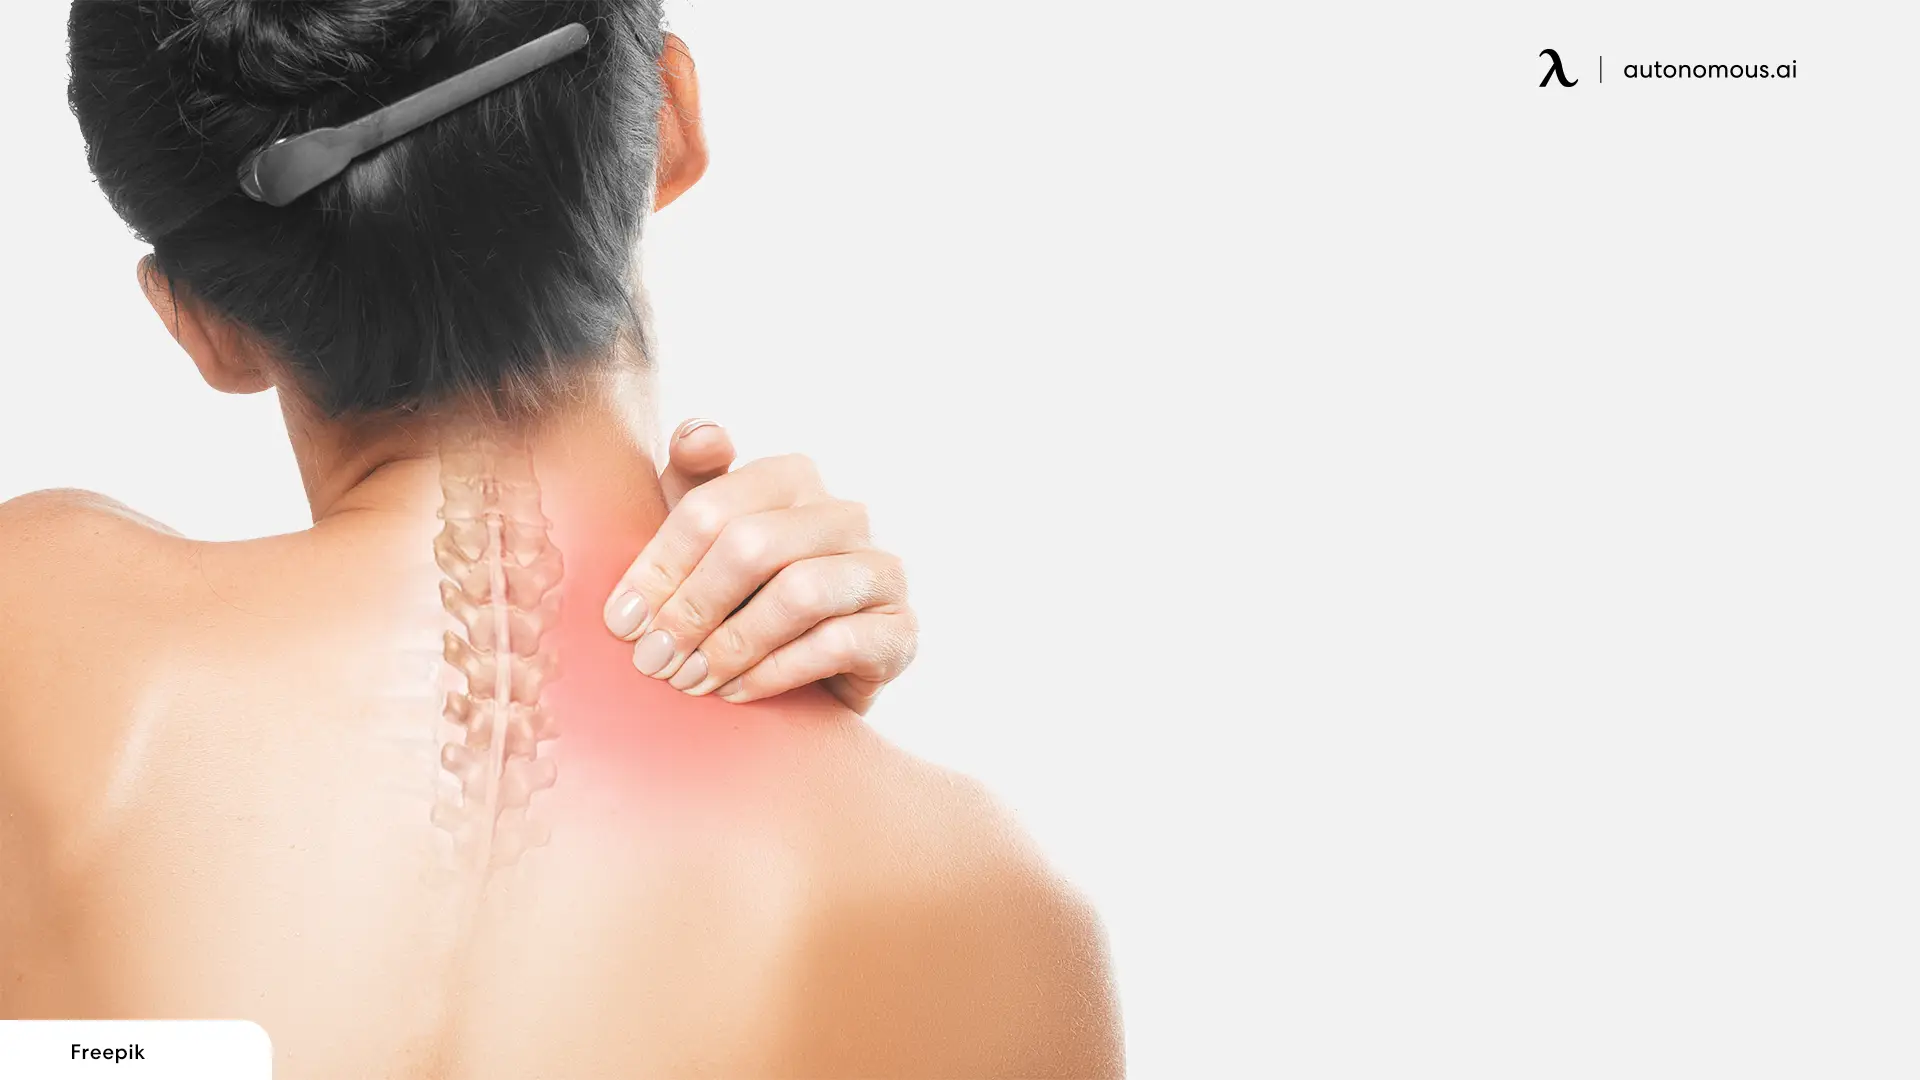 What are the side effects of neck pain?